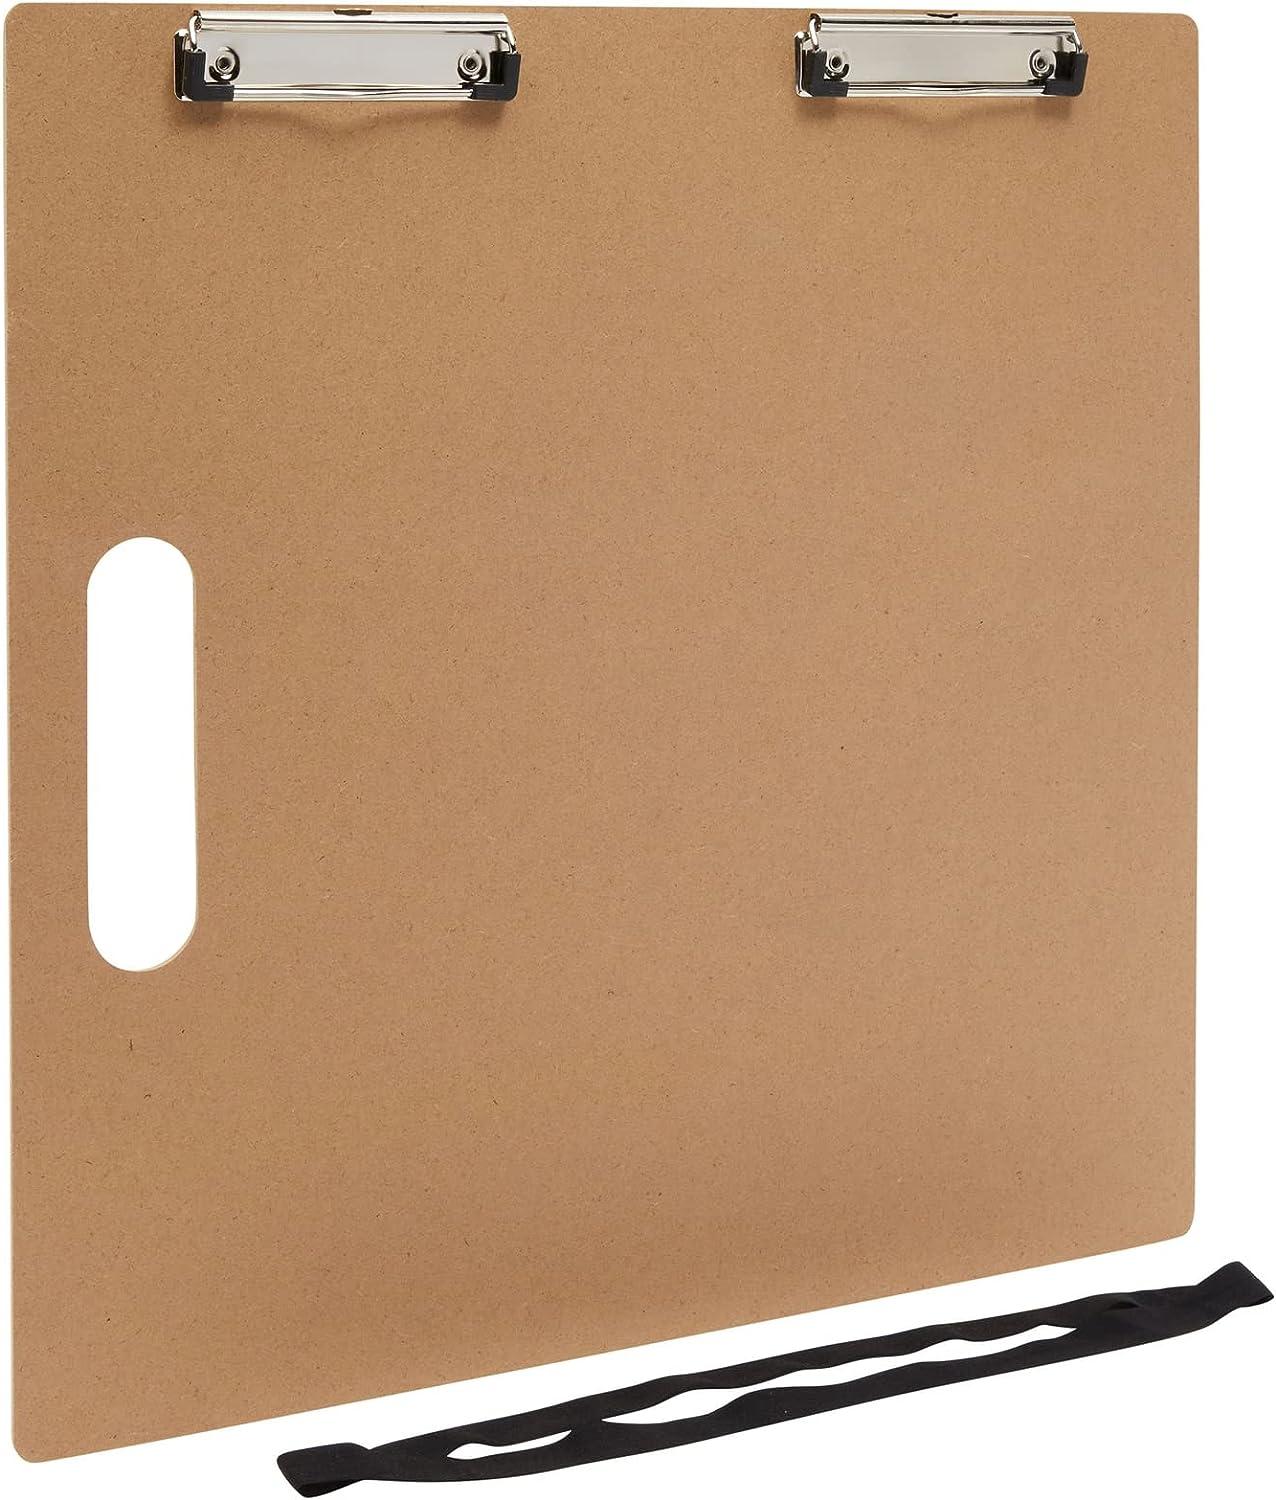 Artists Sketch Board with Double Clips for Art Classroom, Studio